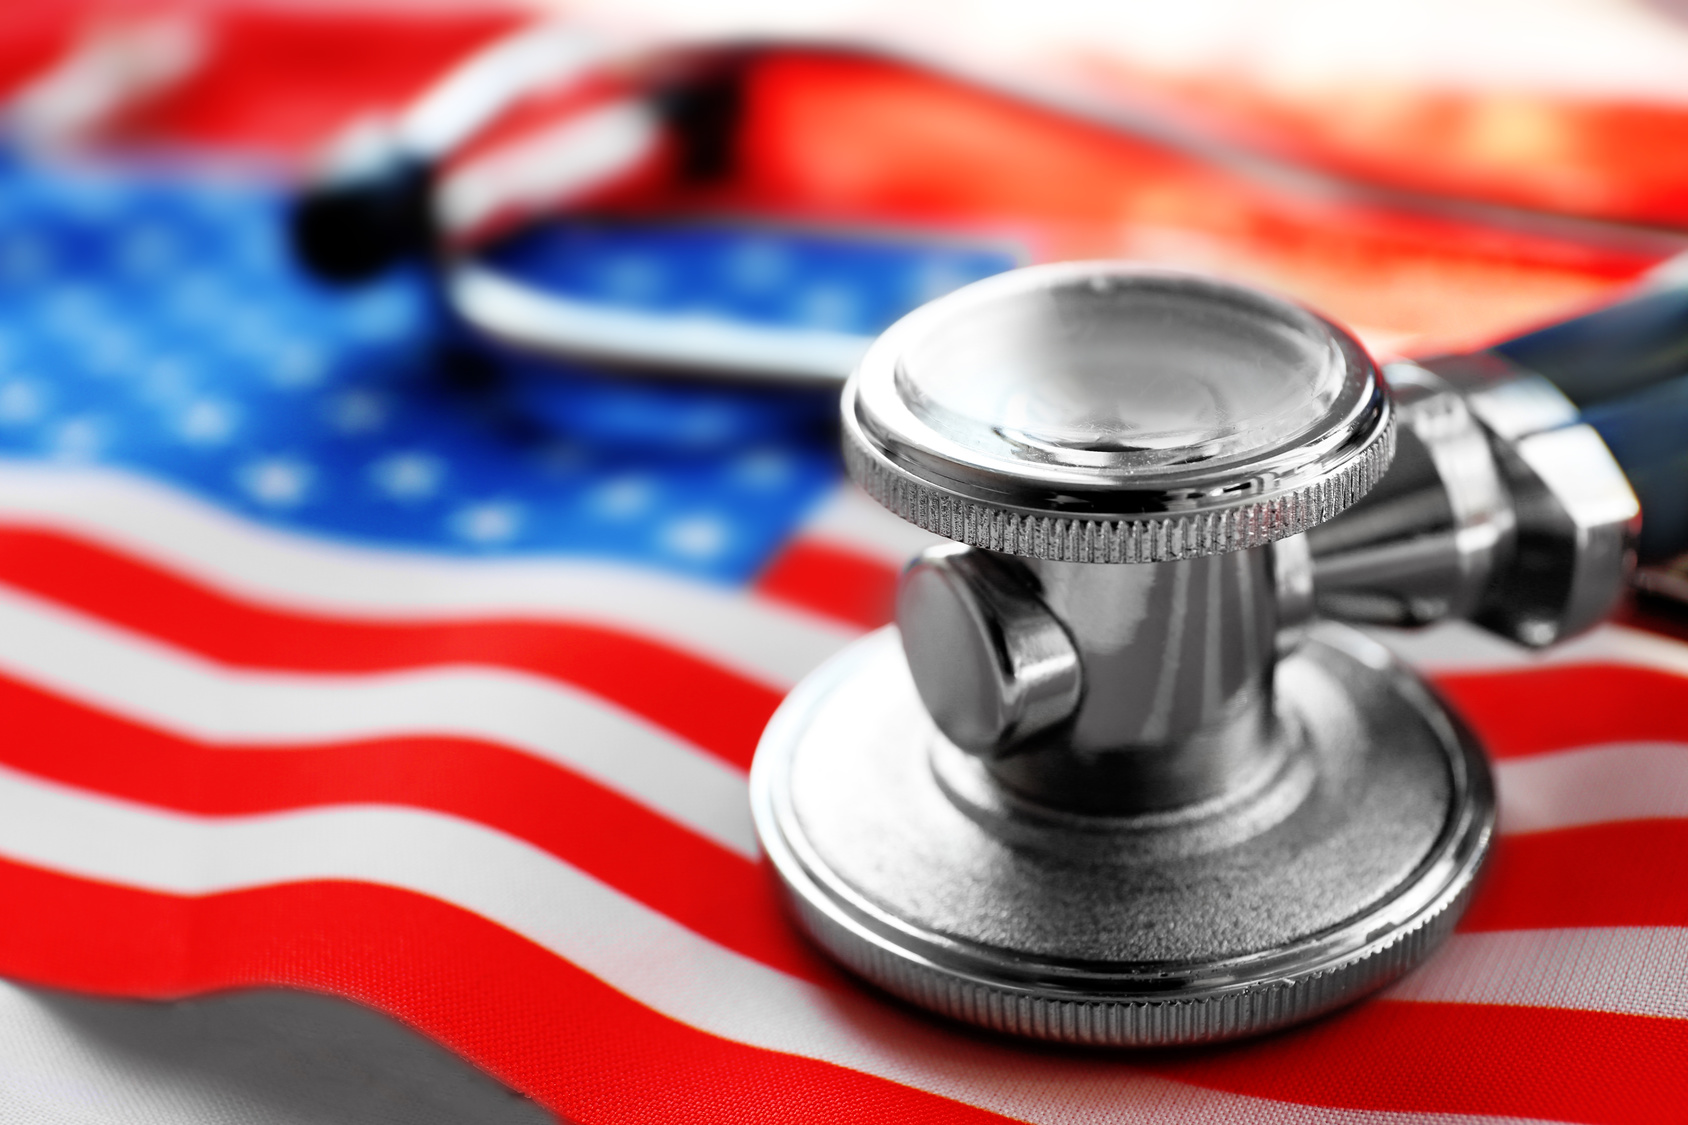 VA Implements Private Sector Healthcare Programs